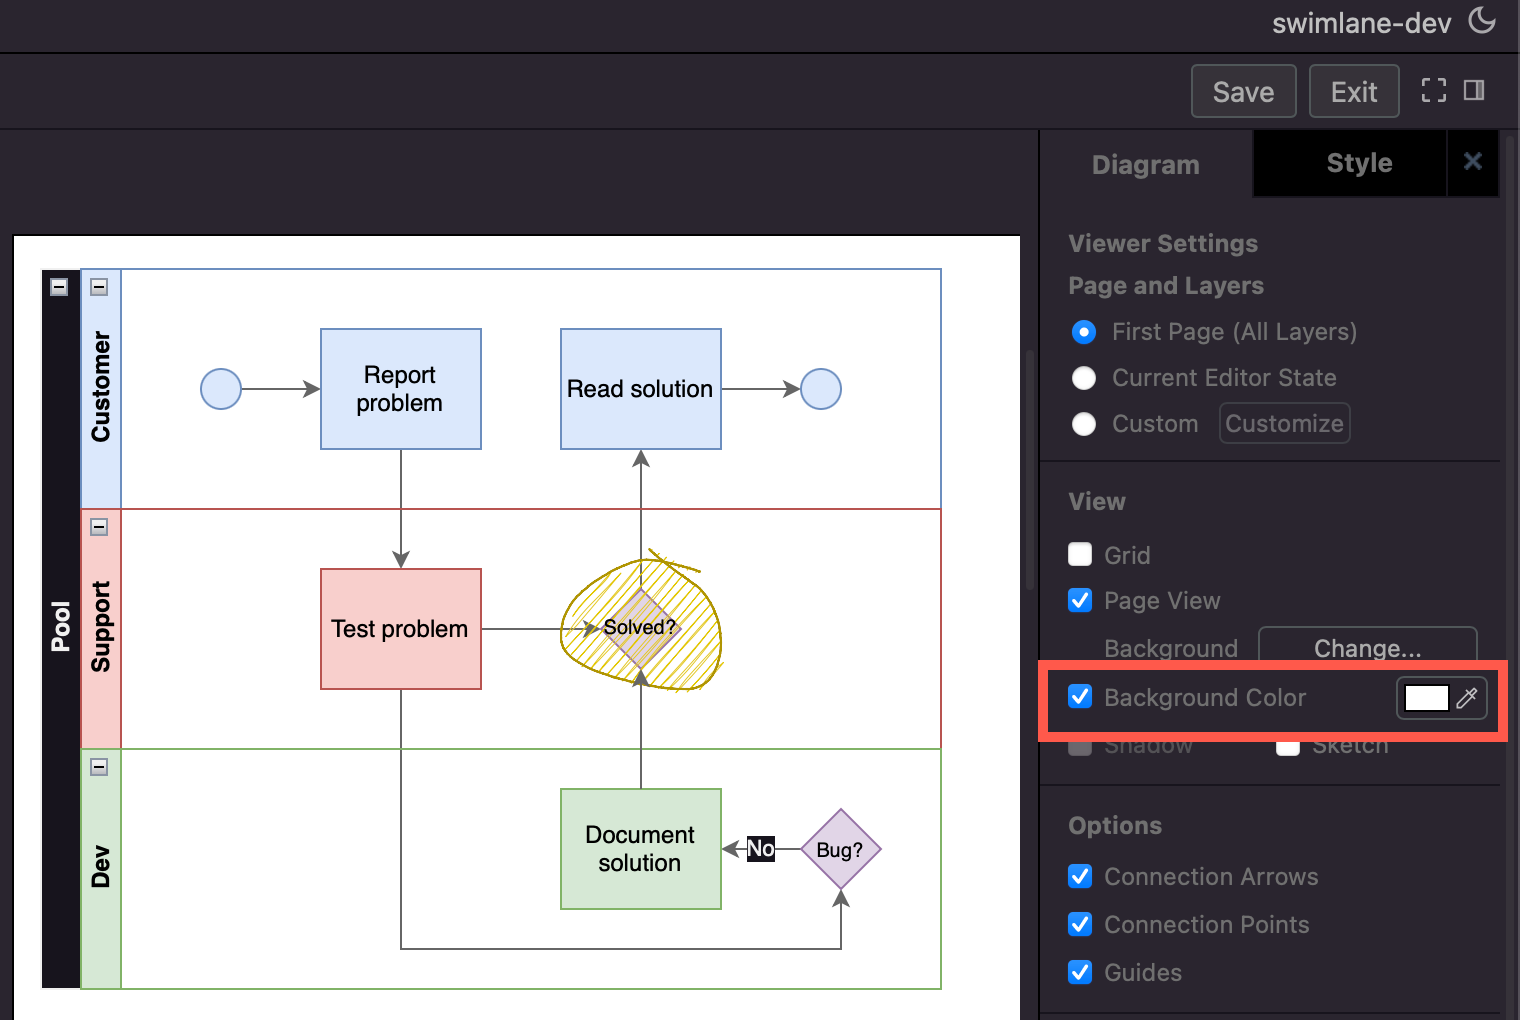 Adding a diagram background ensures your diagram looks the same in both Jira's light and dark themes